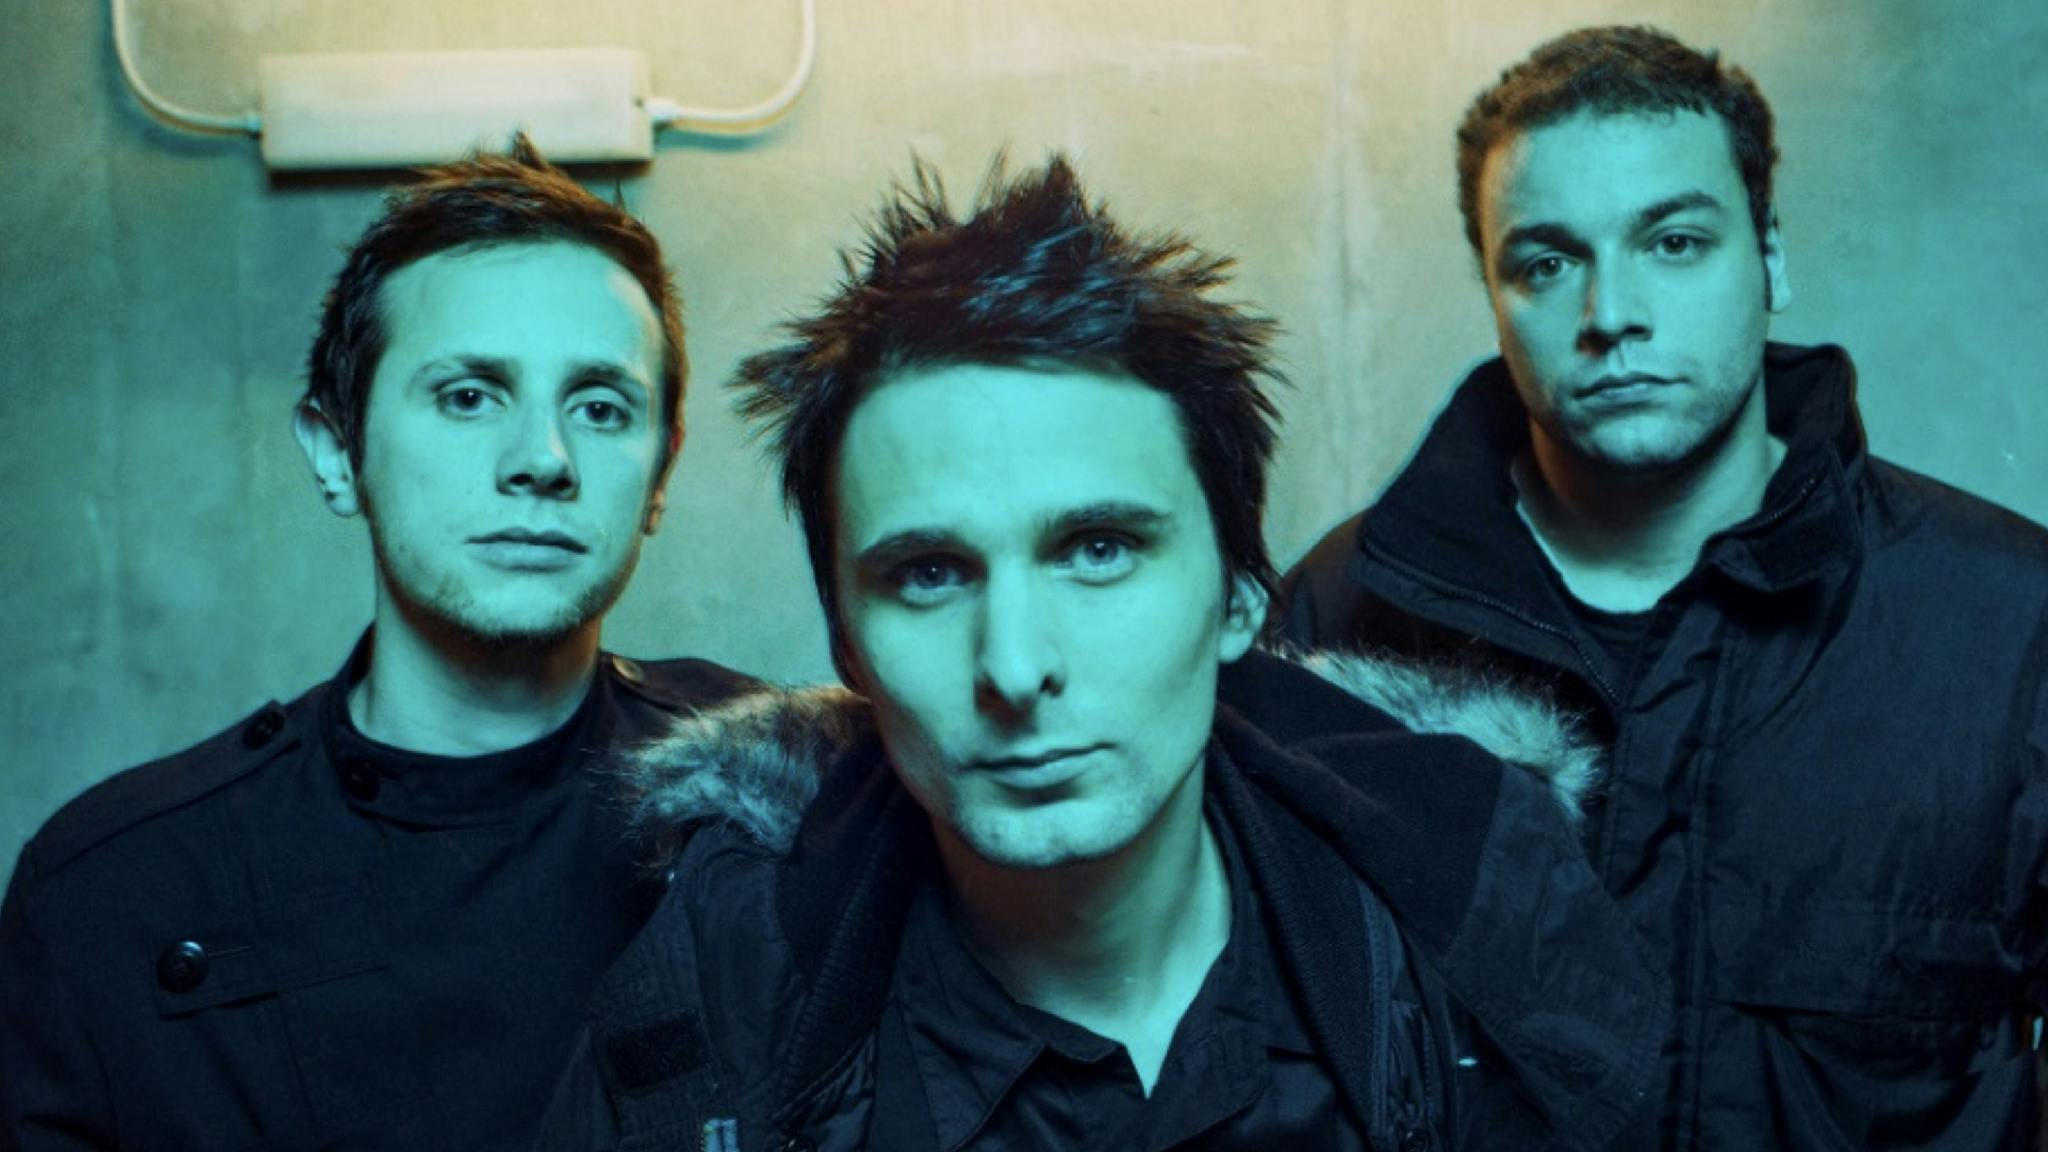 Muse have announced a new Absolution 20th anniversary boxset